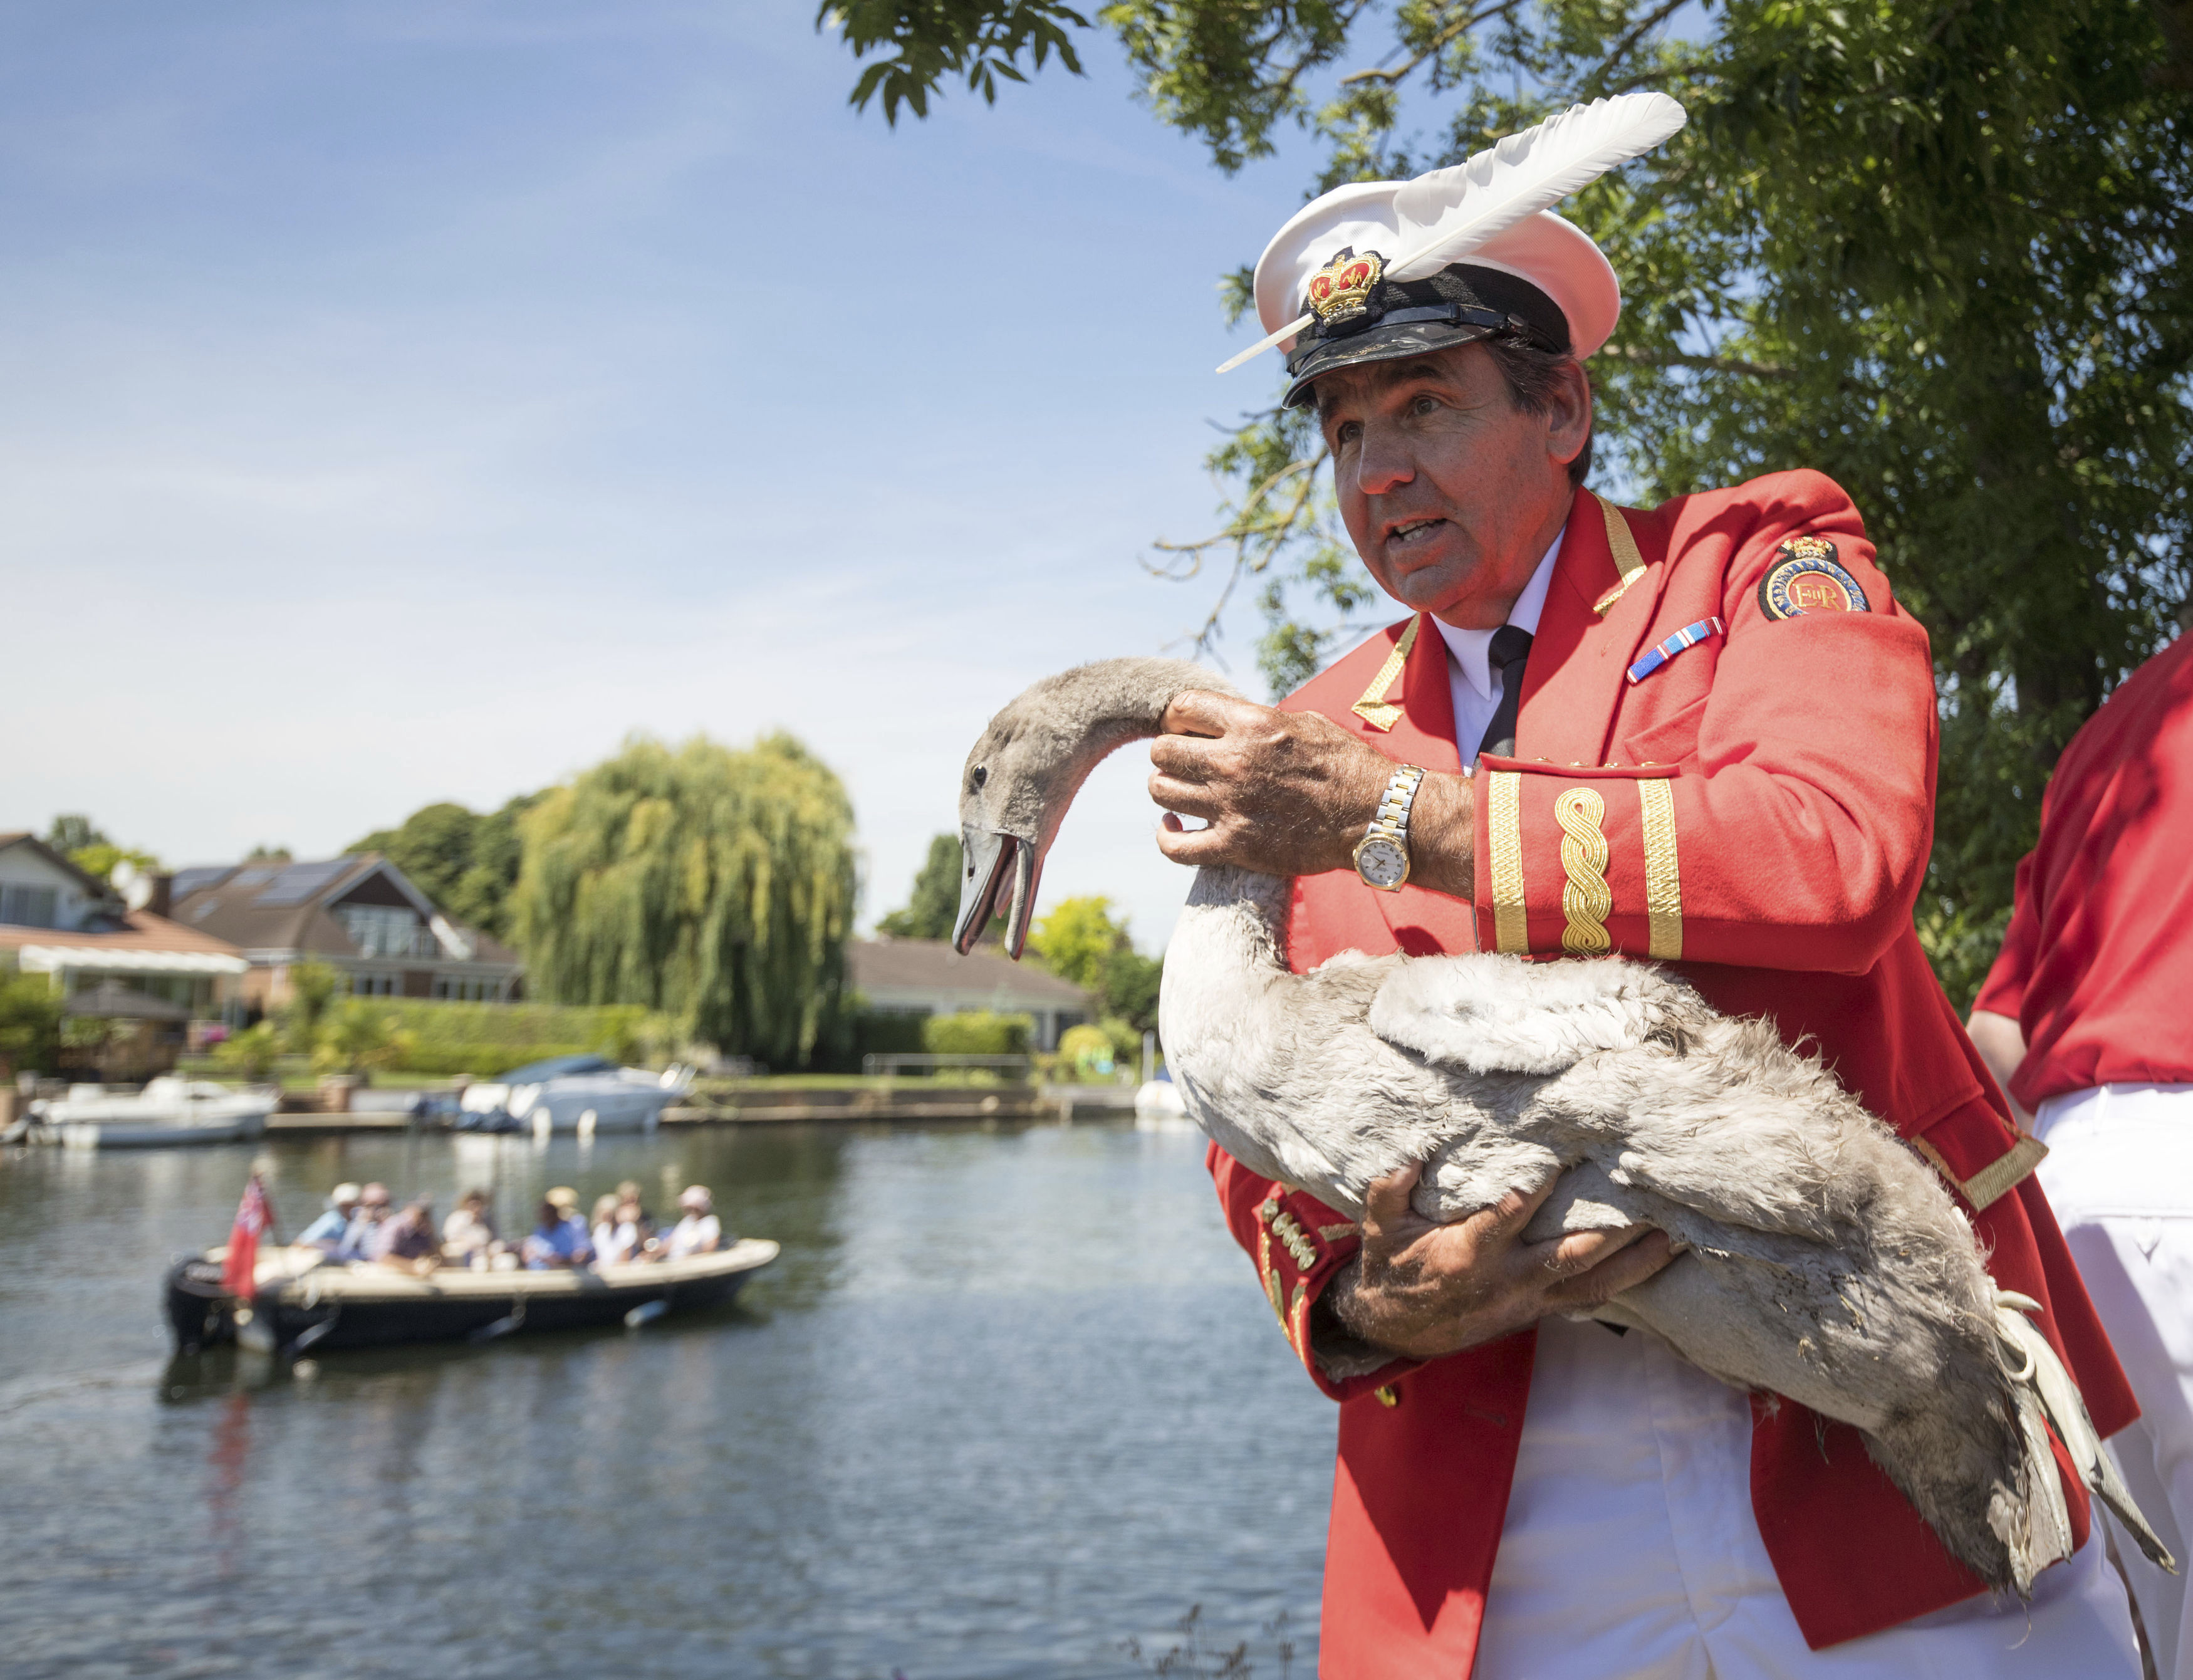 Queens Royal Swan Marker David Barber checks out a cygnet near Staines, England, as the ancient tradition of counting swans along the River Thames begins, Monday July 17, 2017. The ritual known as Swan Upping dates back to the 12th century when the ownership of all unmarked mute swans in open water in Britain was claimed by the Crown in order to ensure a ready supply for feasts. (Steve Parsons/PA via AP)